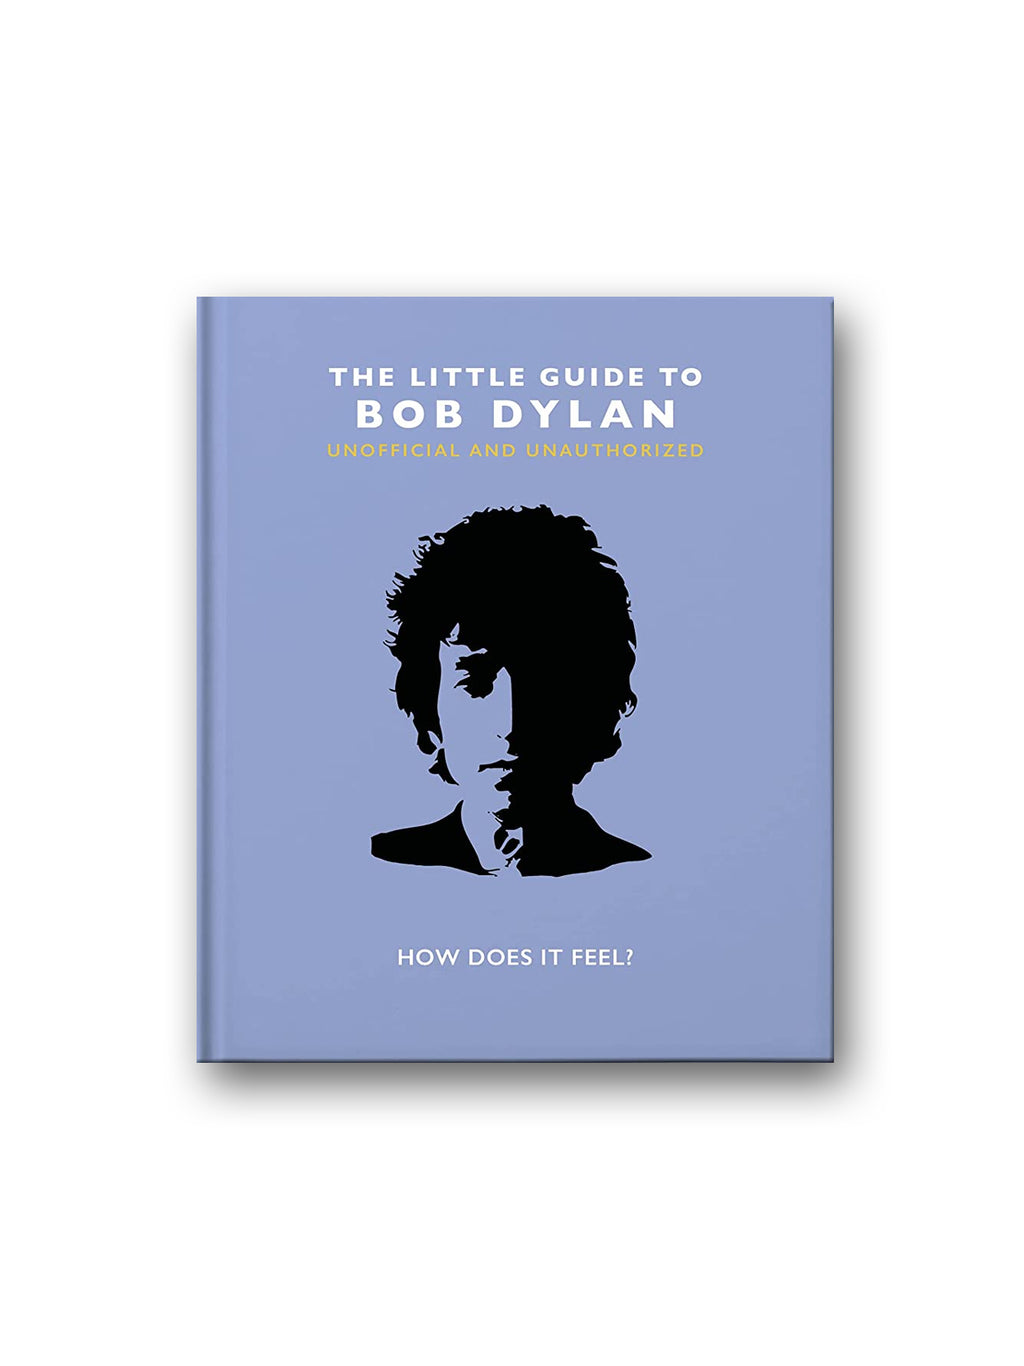 The Little Guide to Bob Dylan